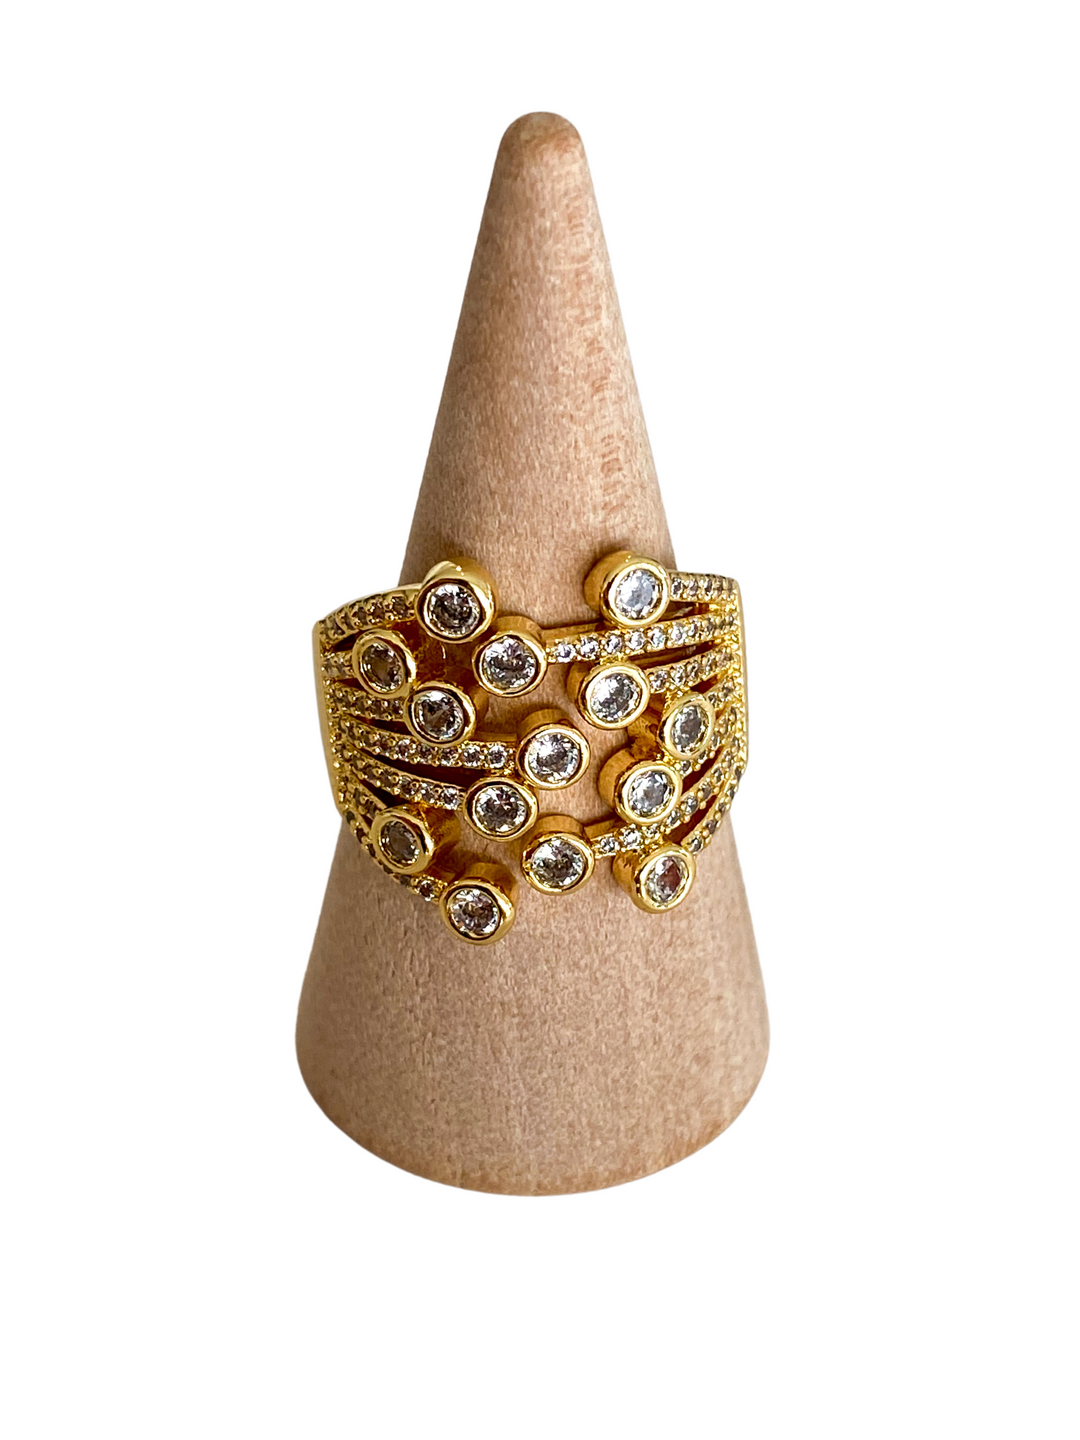 18K Gold Plated Ariadna Ring